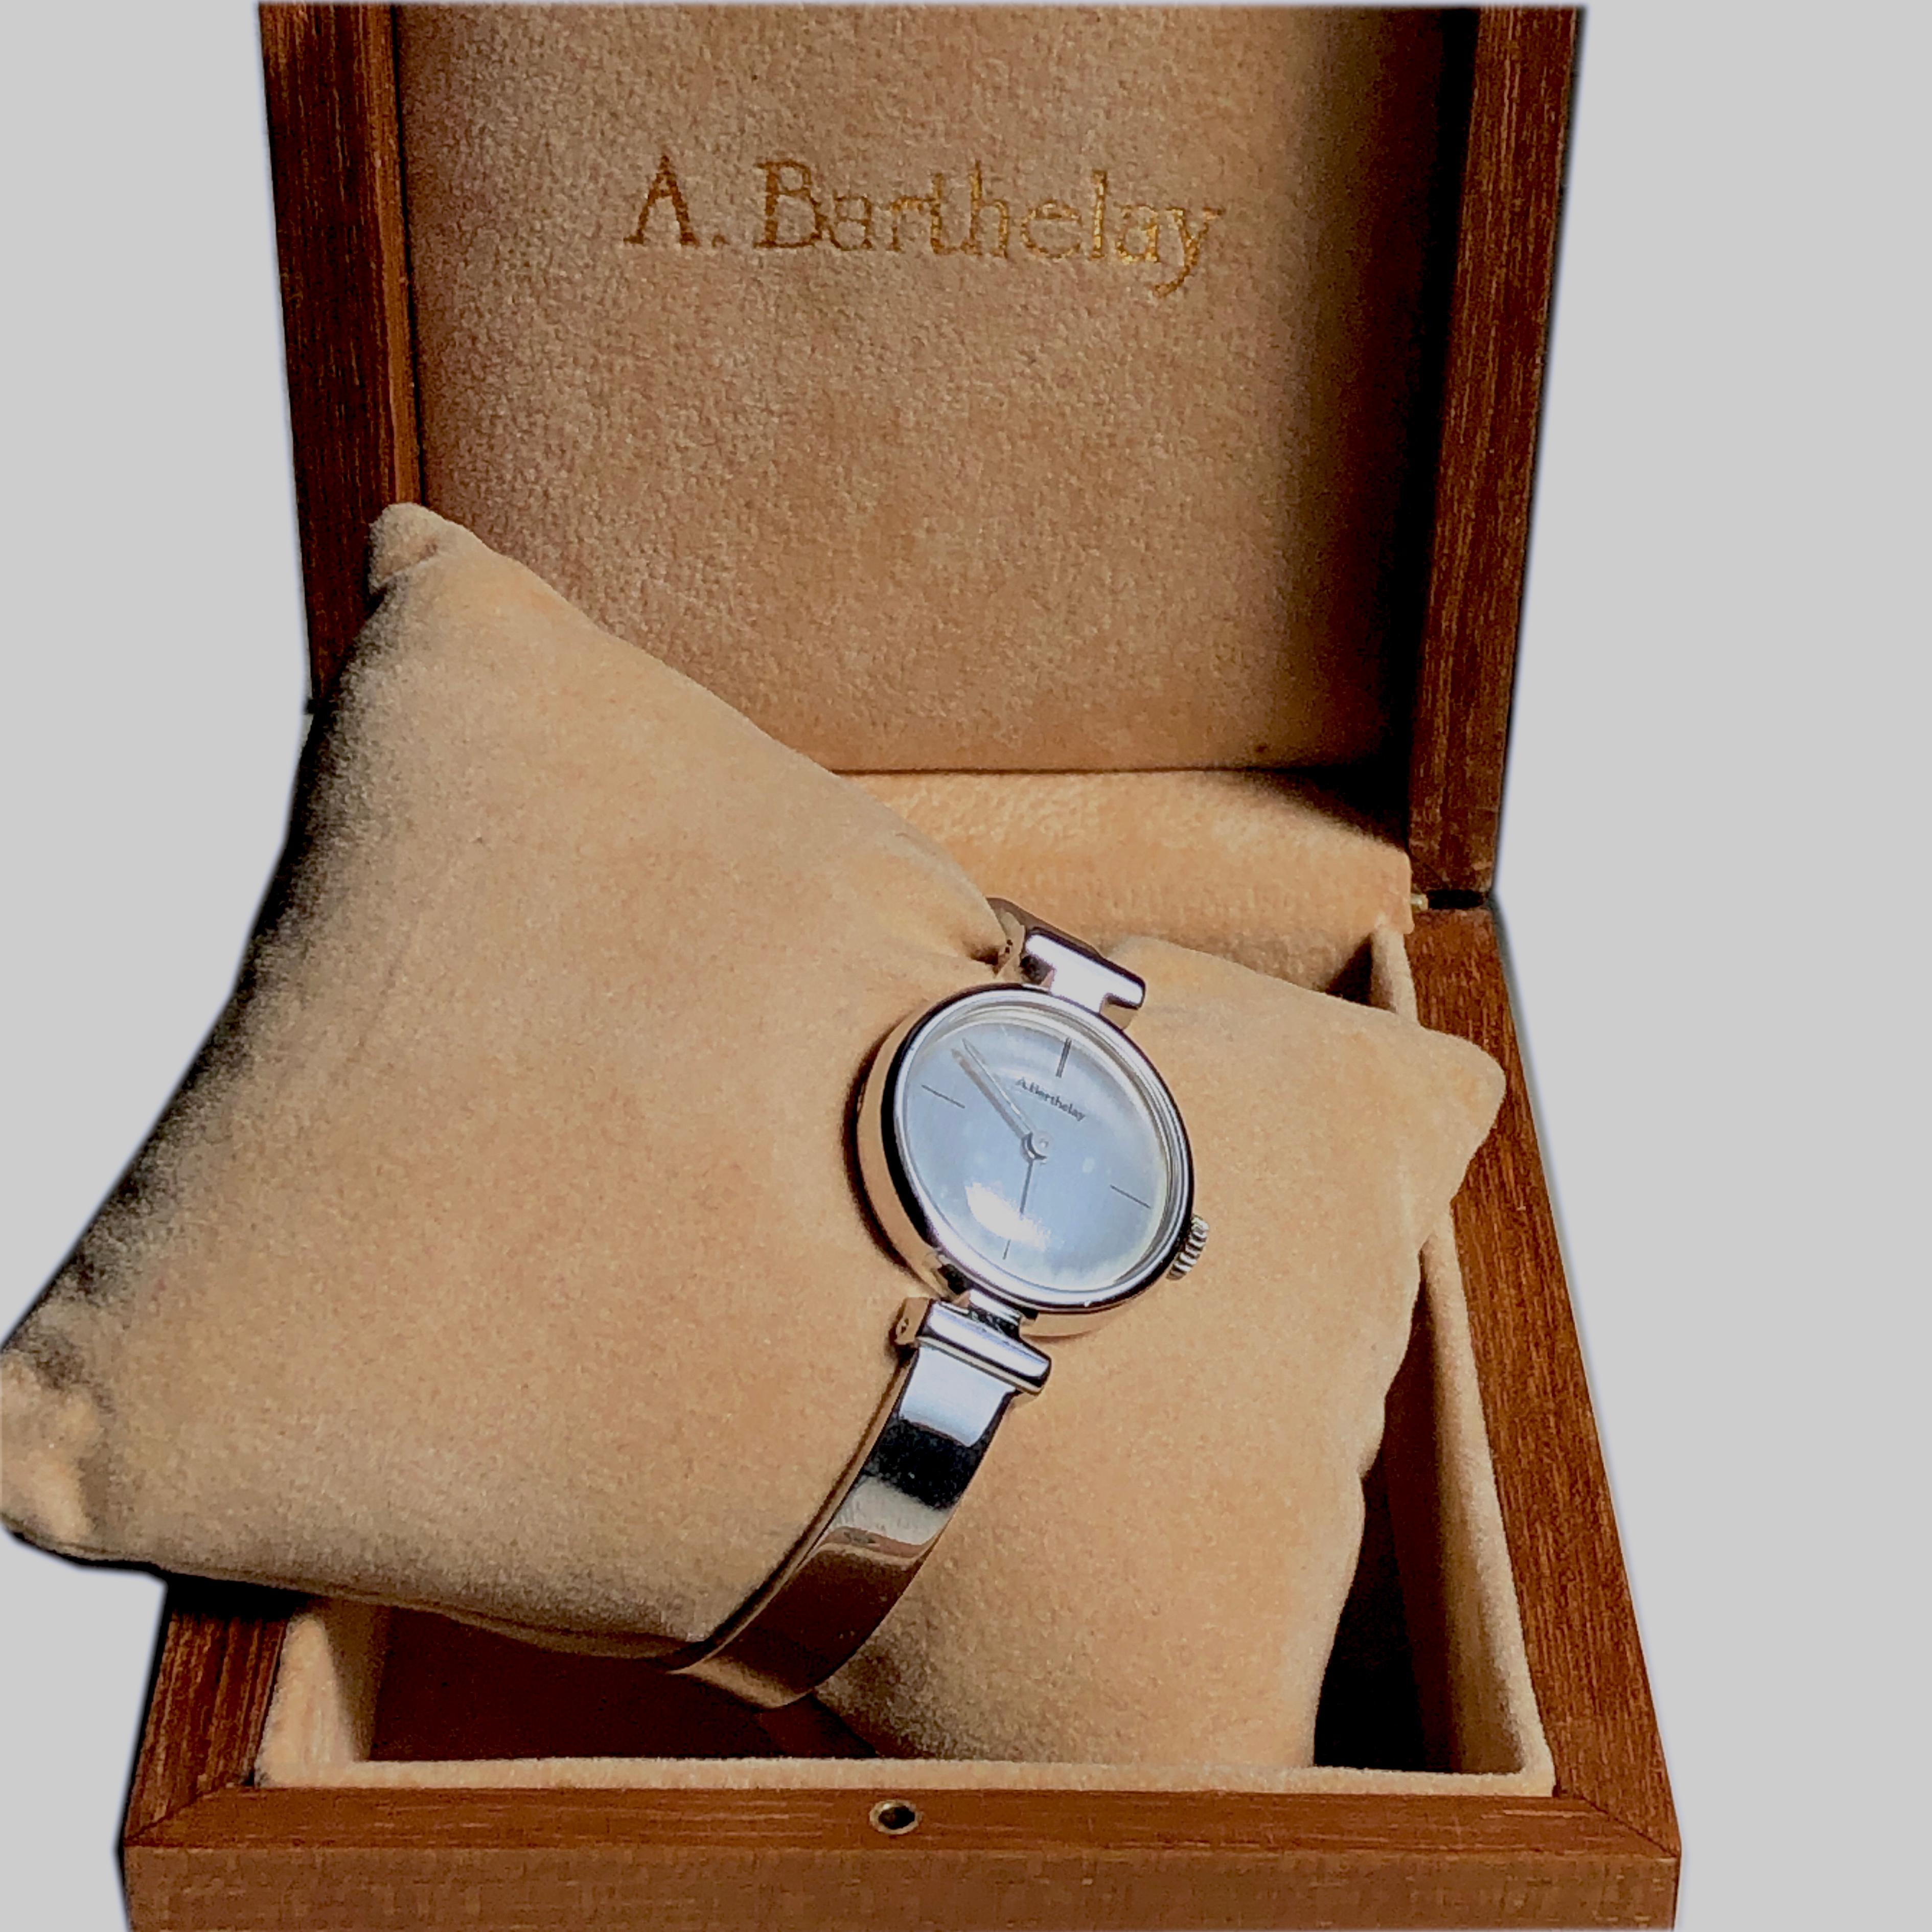 Original 1974 Alexis Barthelay Hand-Wound Movement Sterling Silver Watch For Sale 7